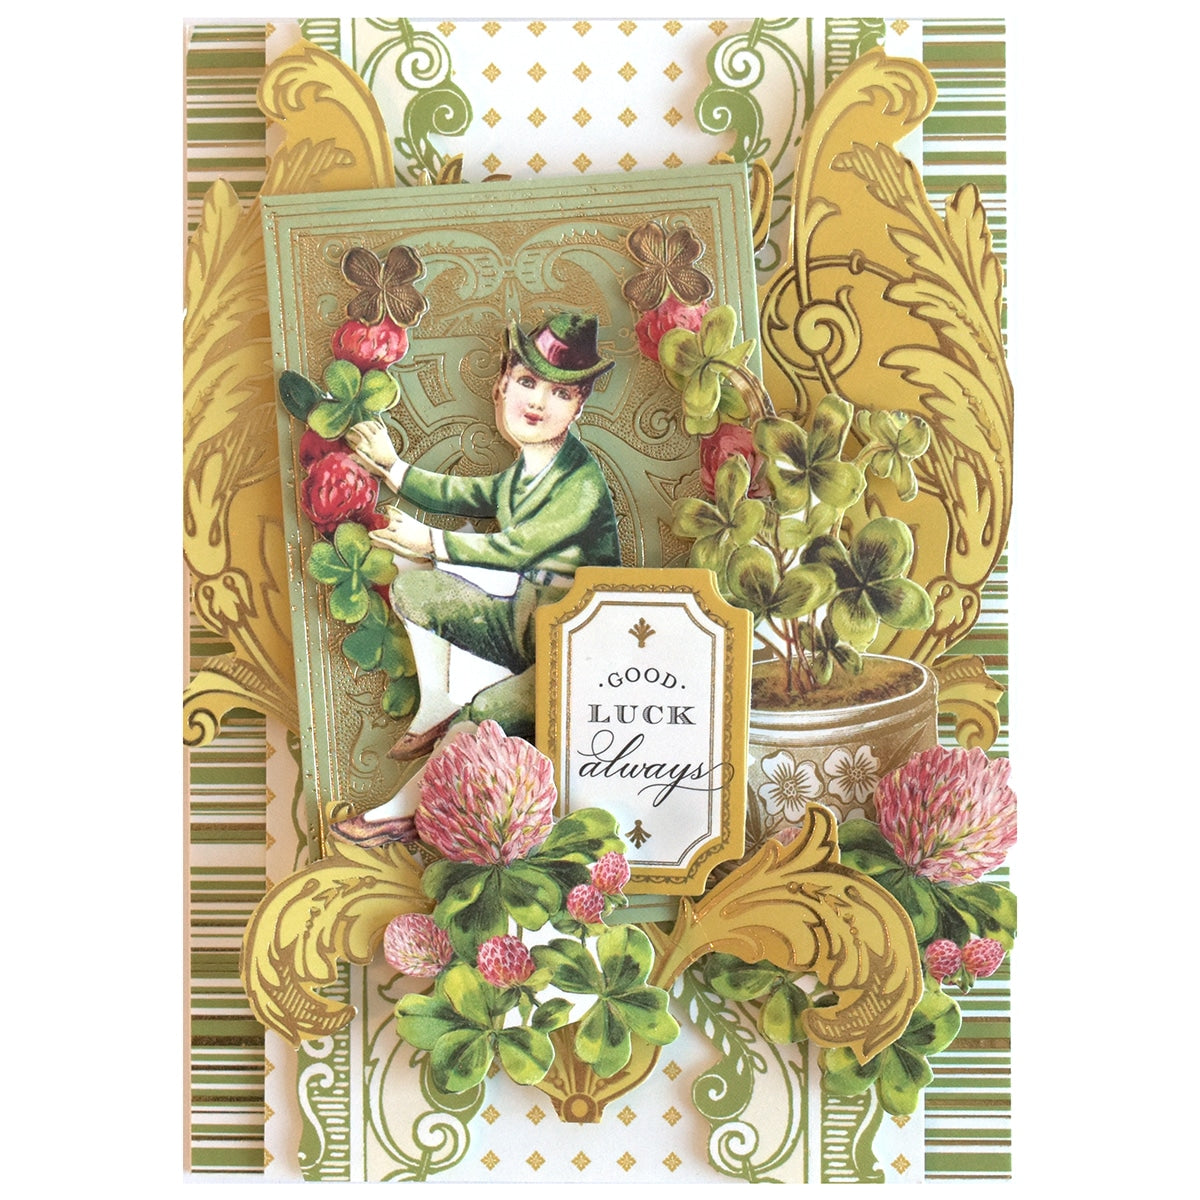 a card with a picture of a woman and flowers.